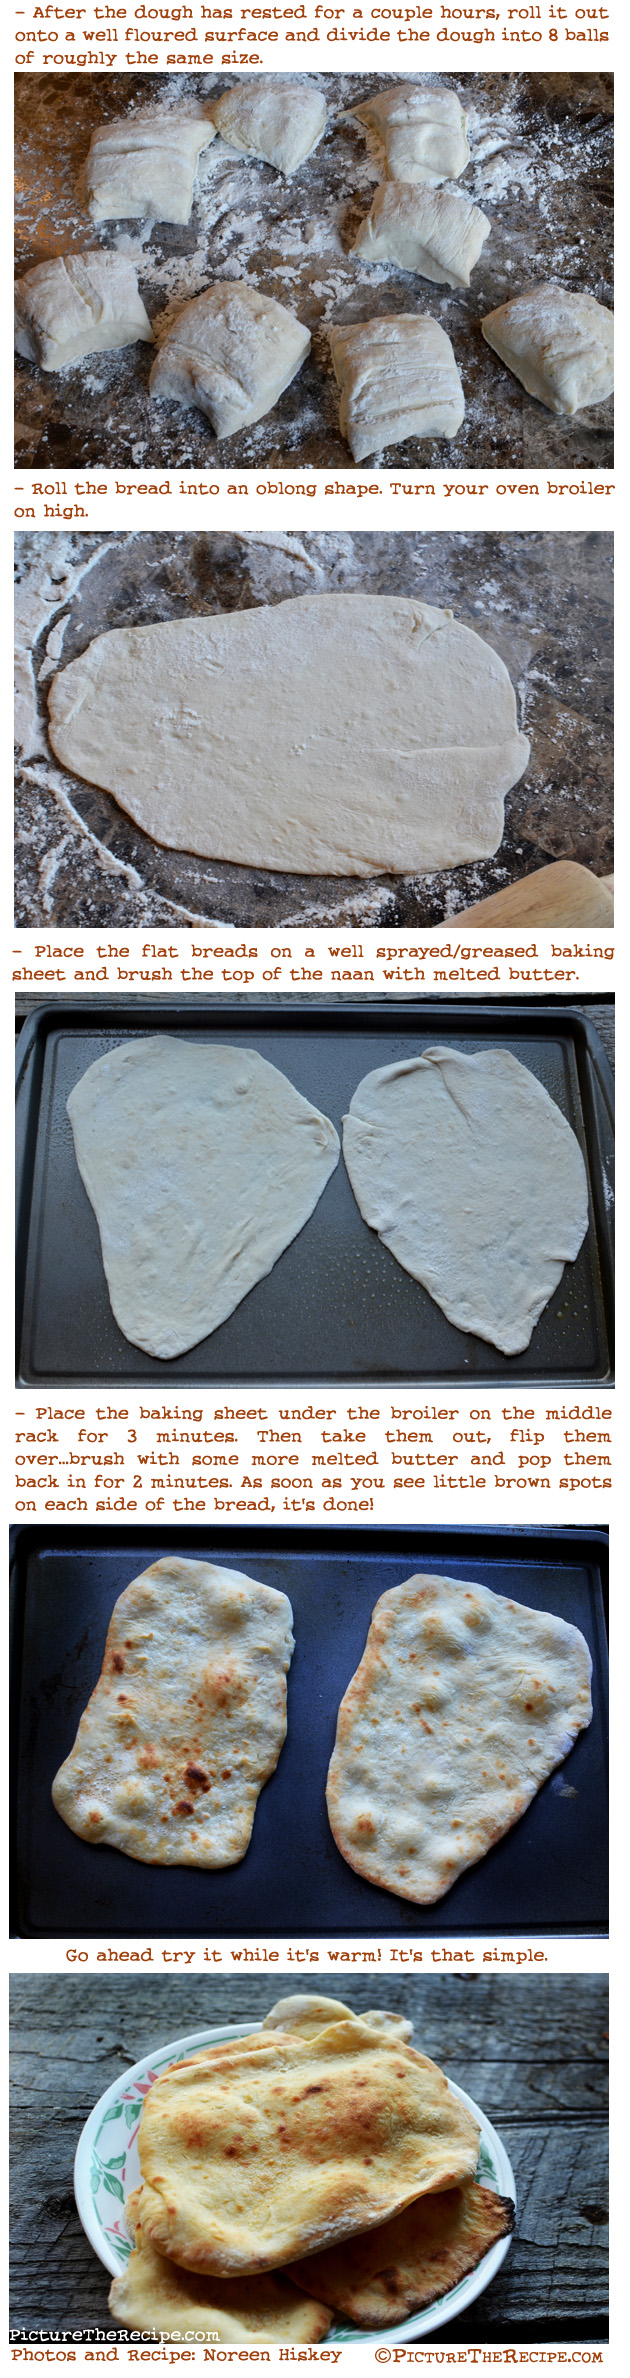 What is a recipe for flat bread made without yeast?